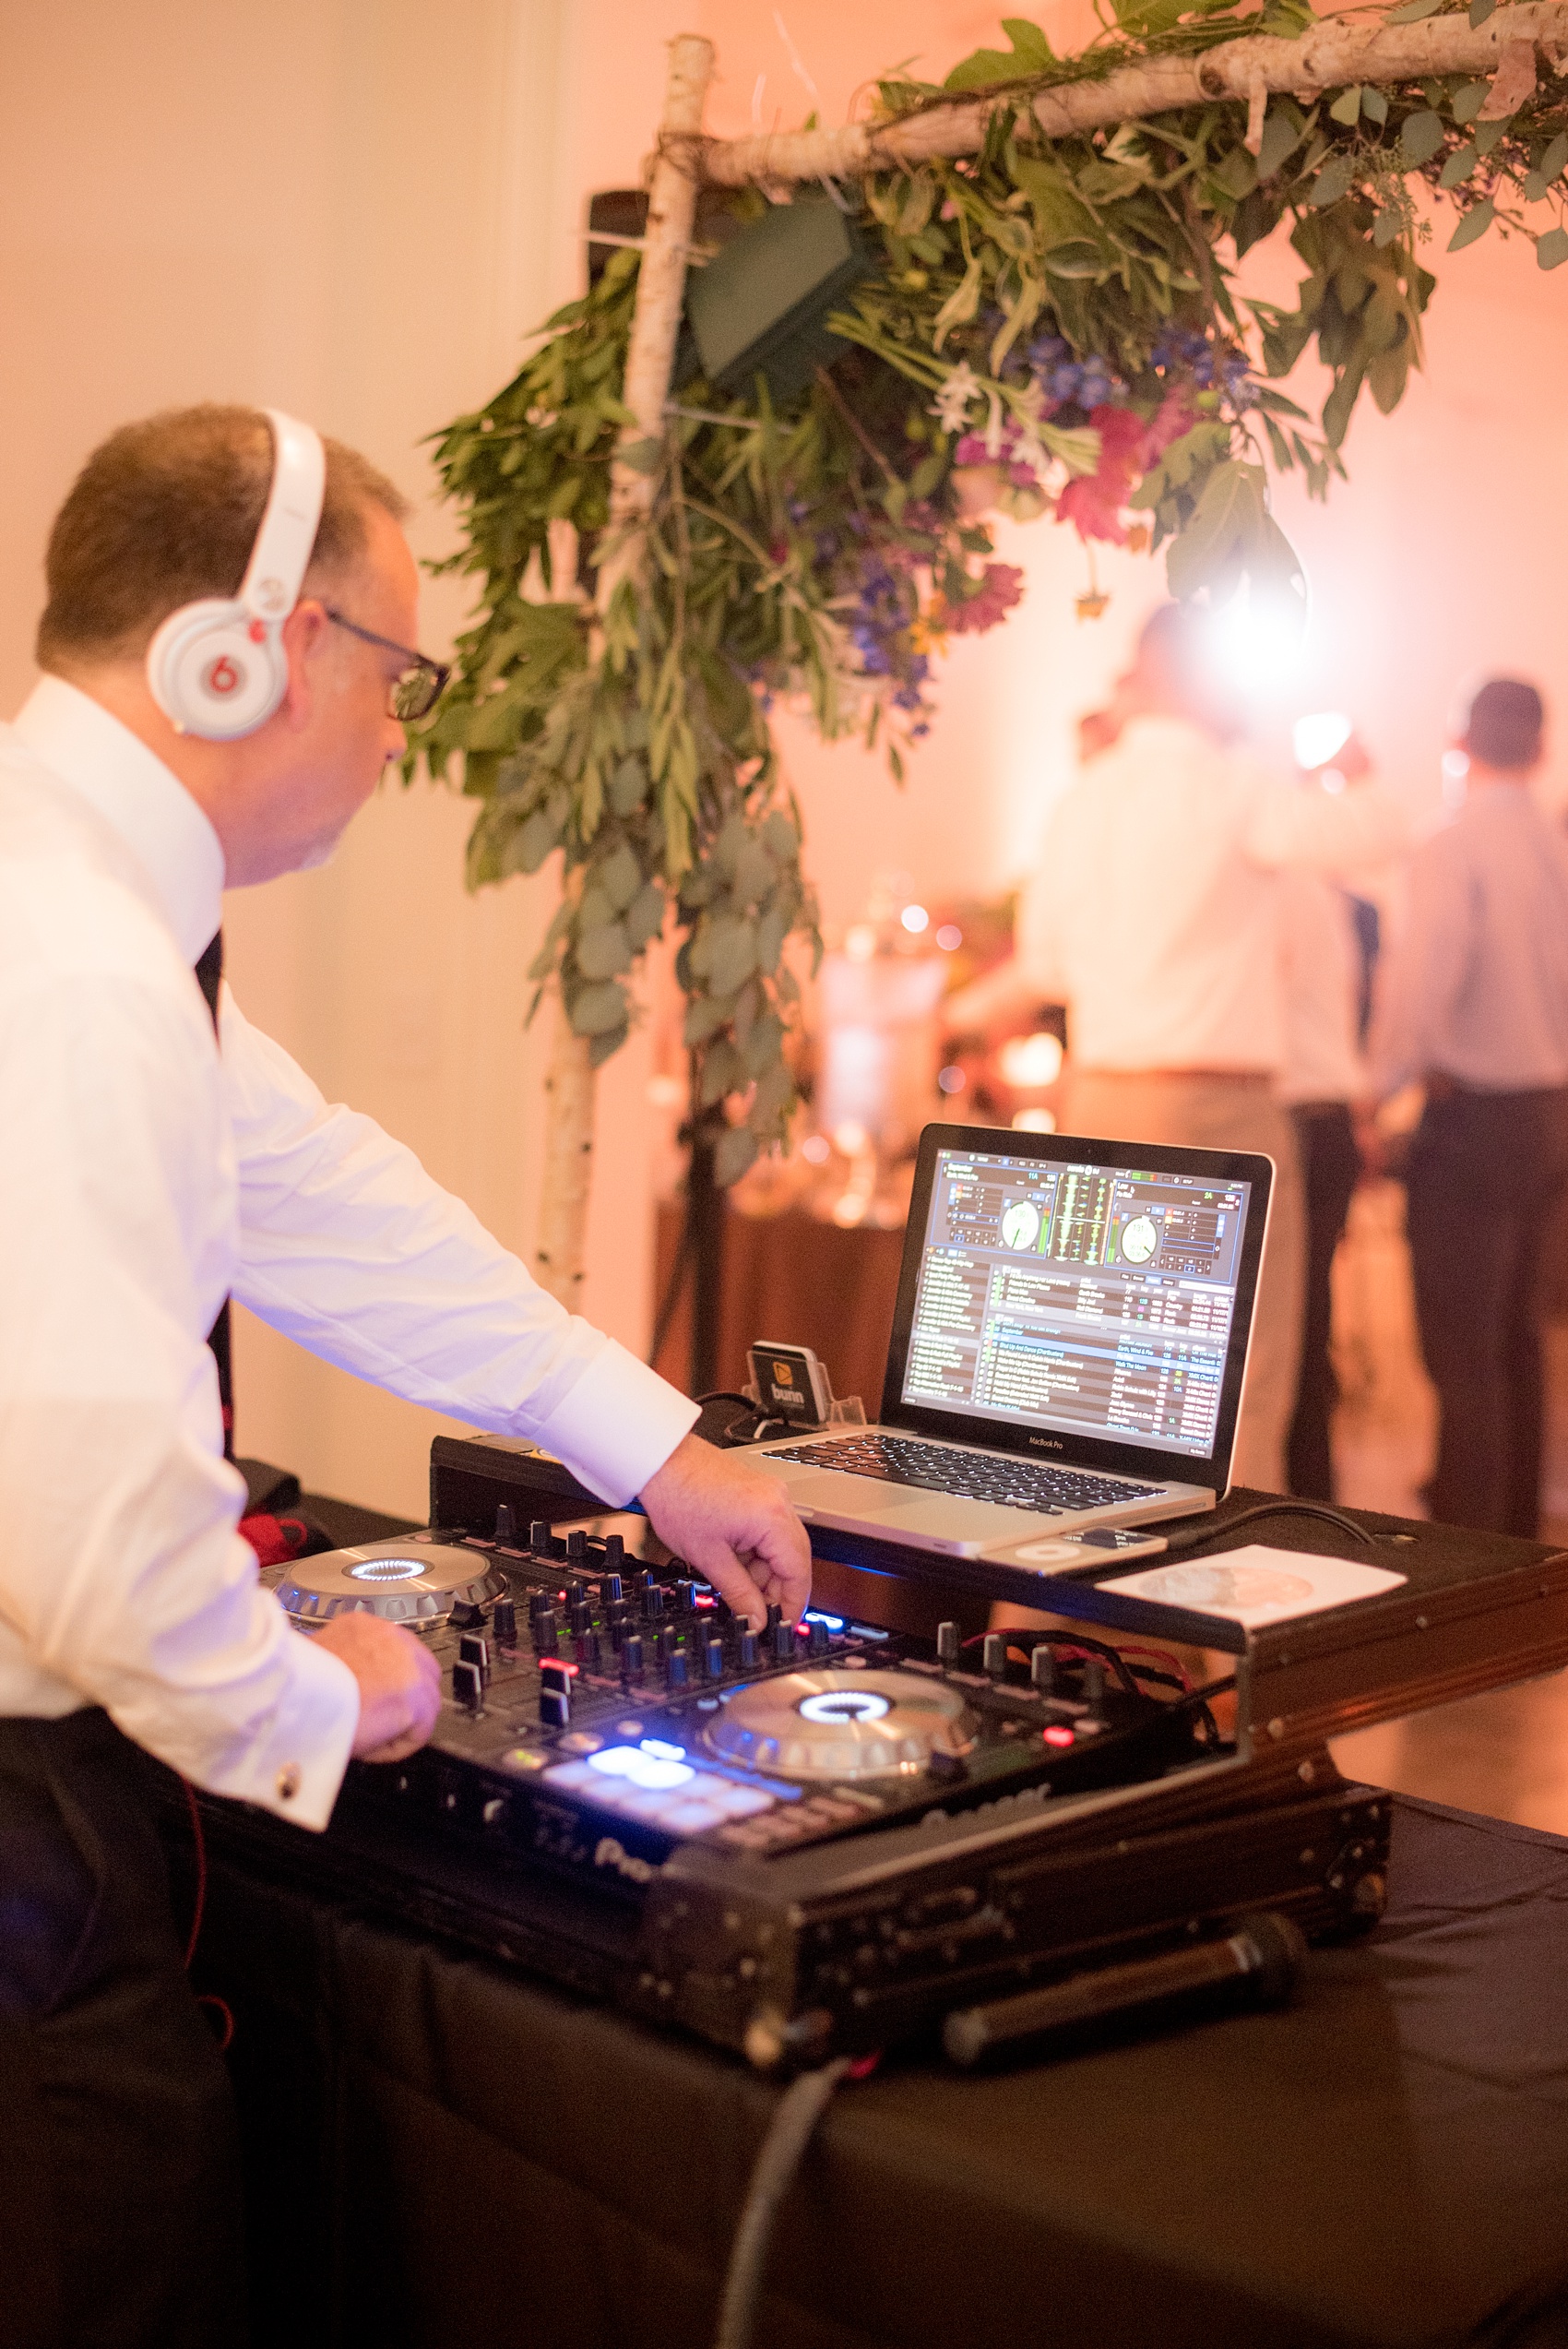 kkel Paige Photography wedding photos at The Merrimon-Wynne House in downtown Raleigh. A picture of Randy from Bunn DJ Company DJing the evening.